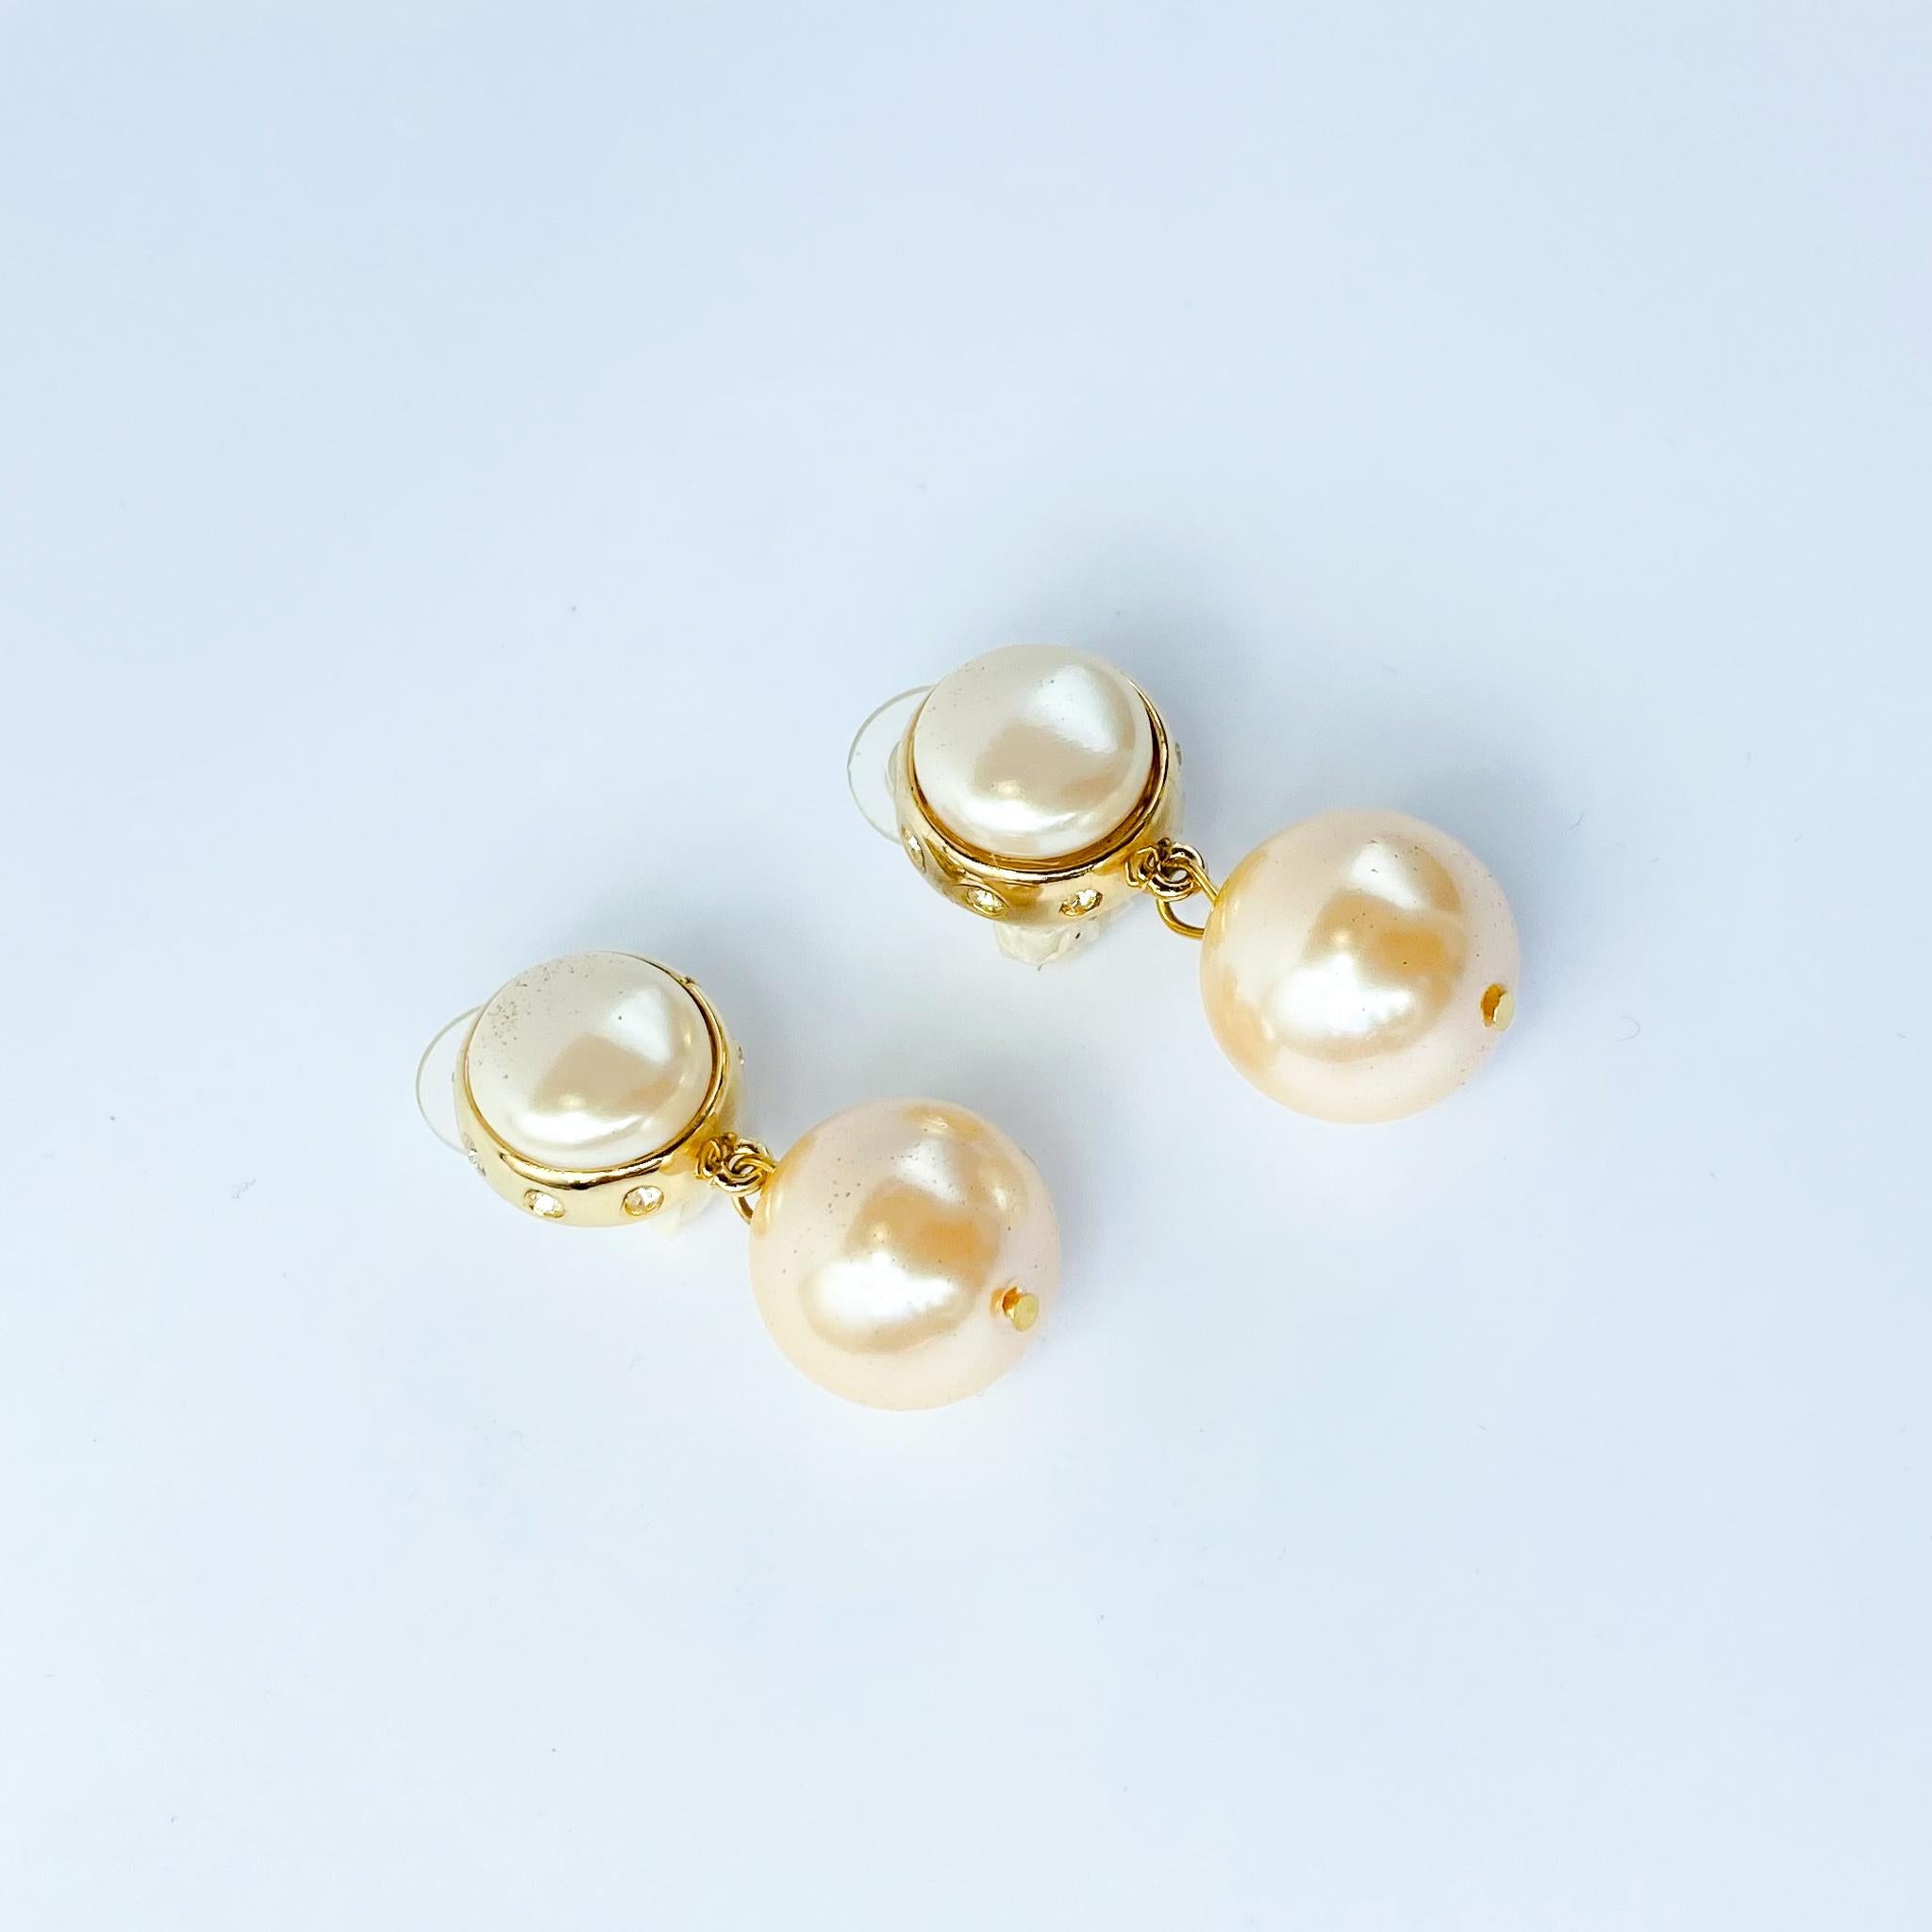 givenchy earrings pearl